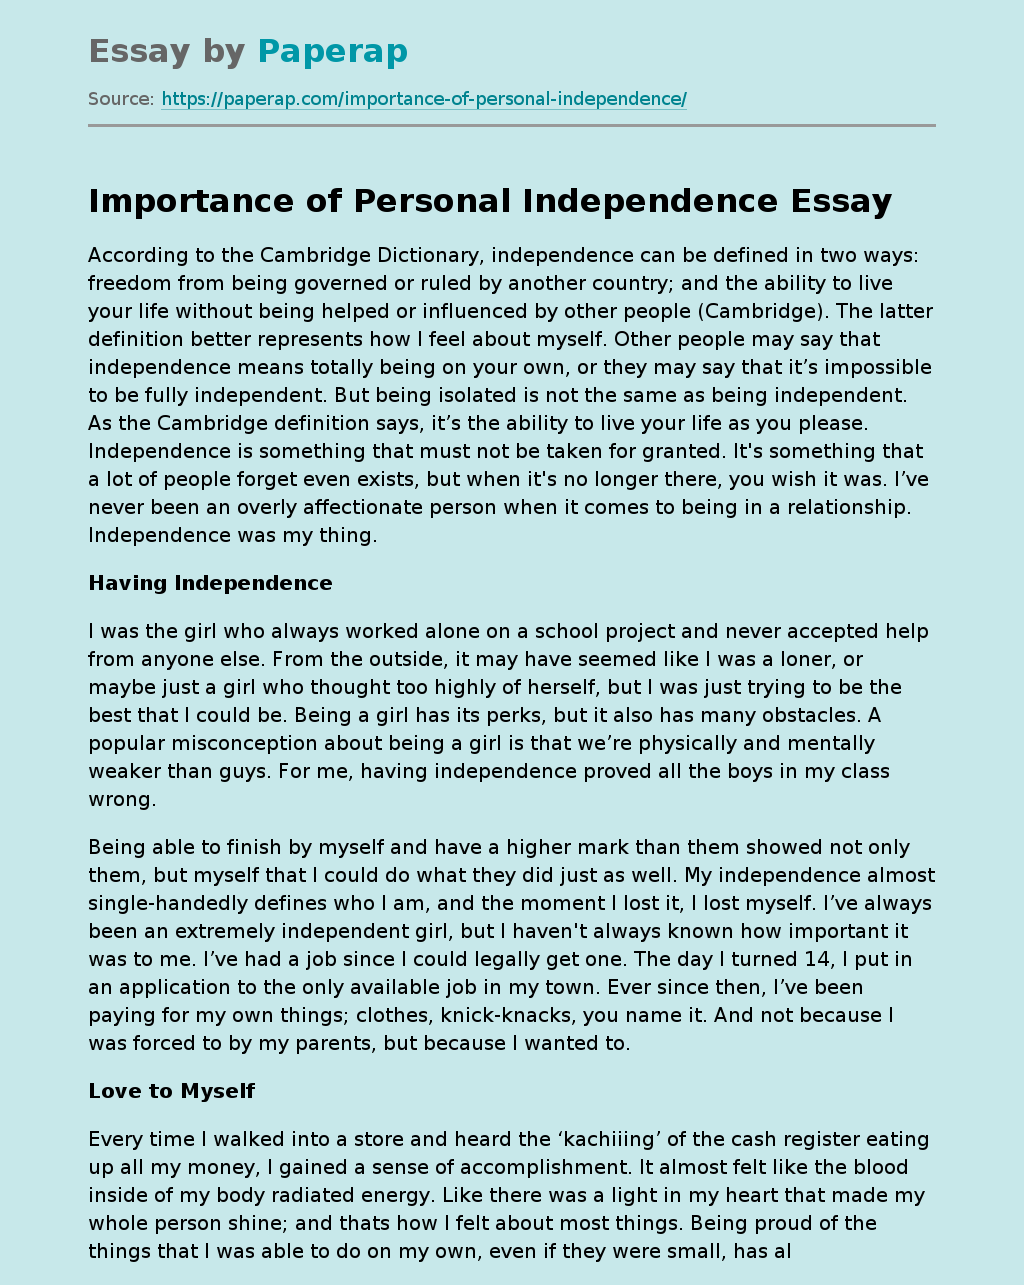 Importance of Personal Independence